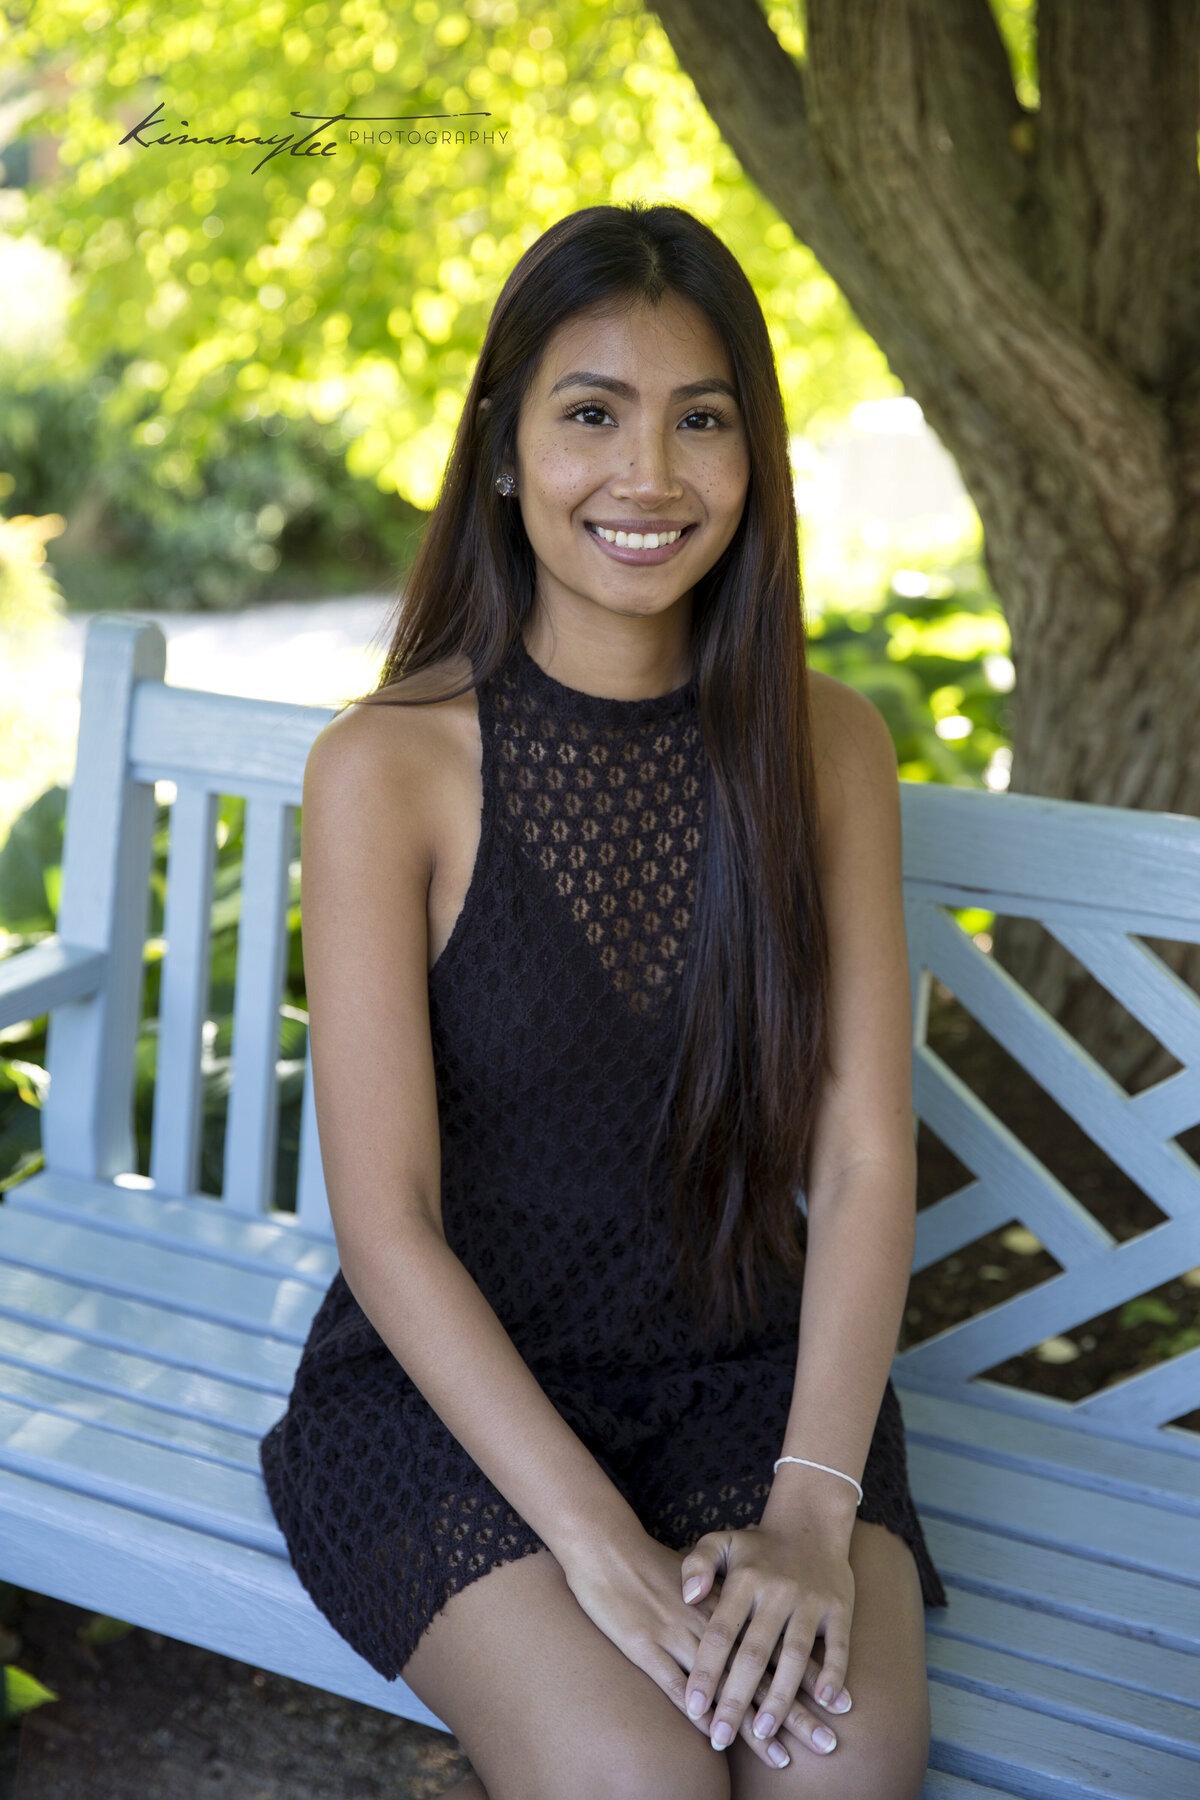 Smiling girl in black dress sitting on a blue bench